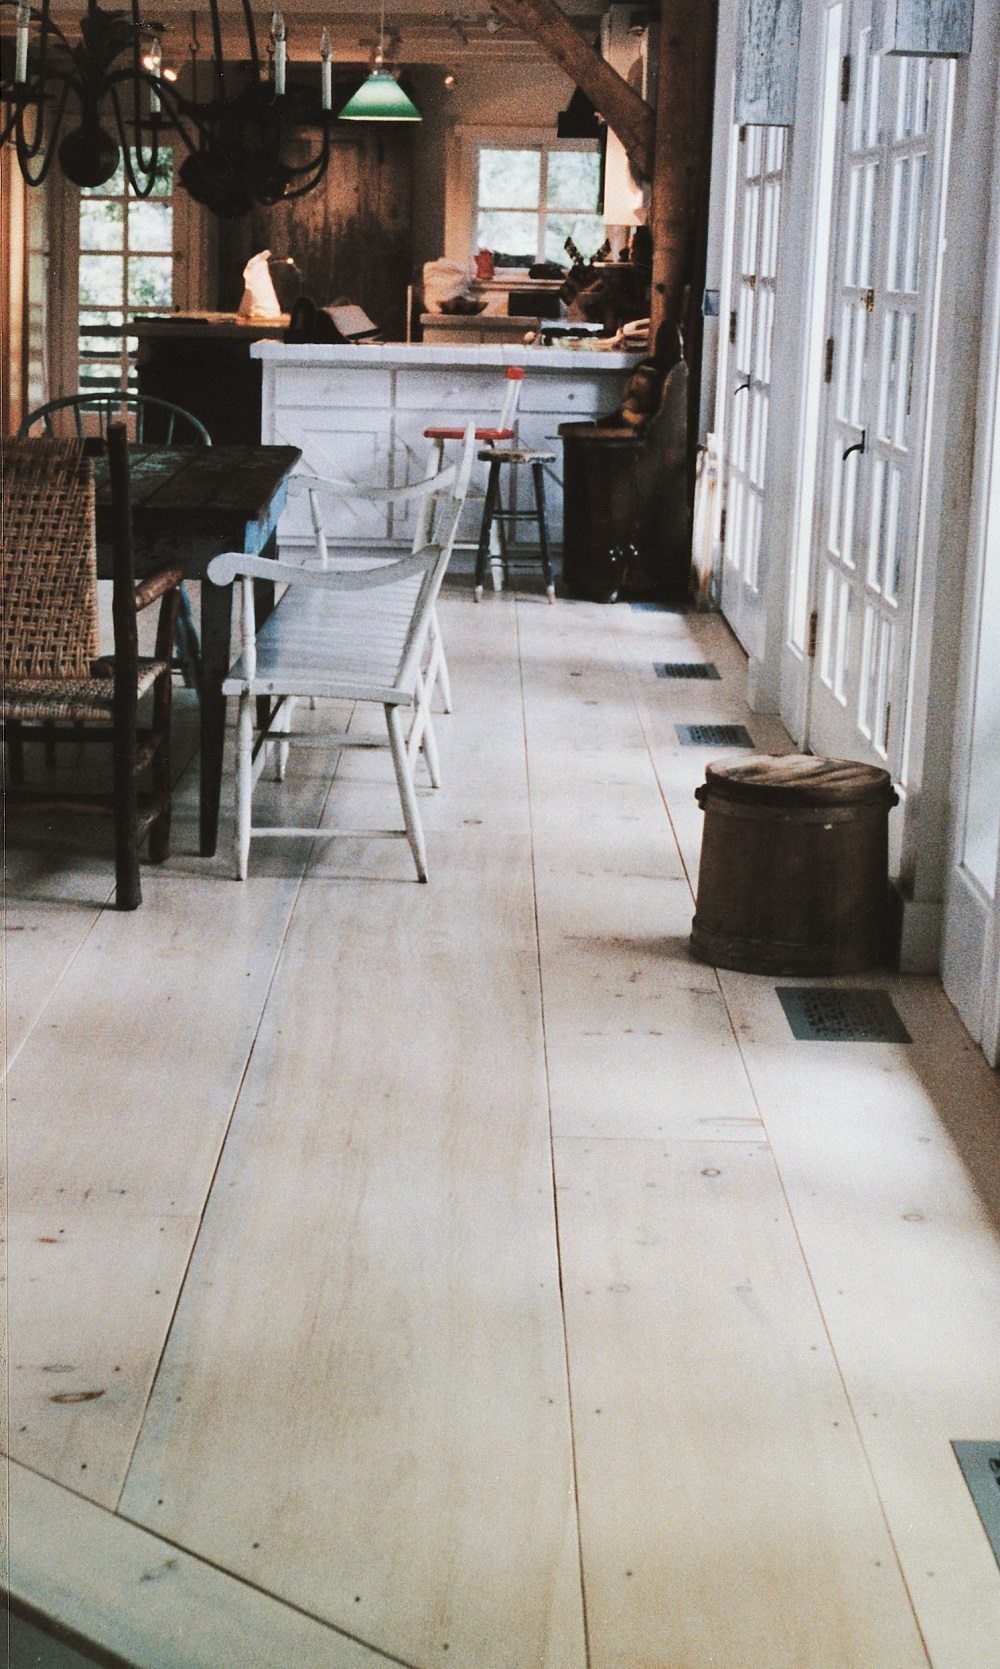 Eastern White Pine Flooring in a Rustic Kitchen